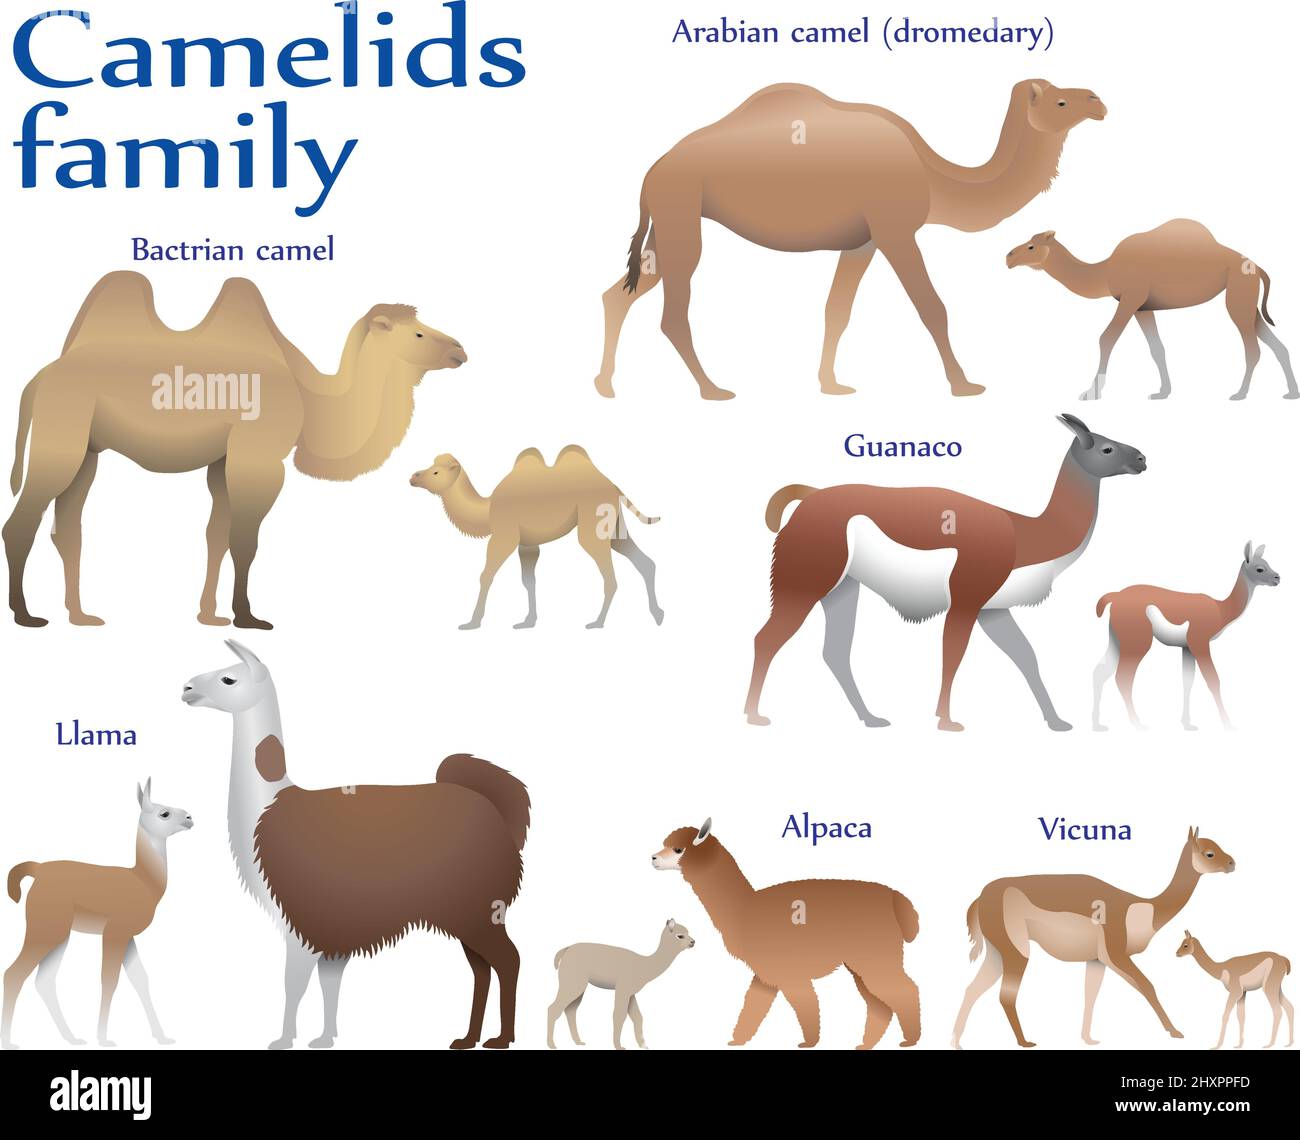 Collection of different species of mammals of camel family, adults and cubs, in colour image: bactrian camel, arabian camel (dromedary), llama, alpaca Stock Vector